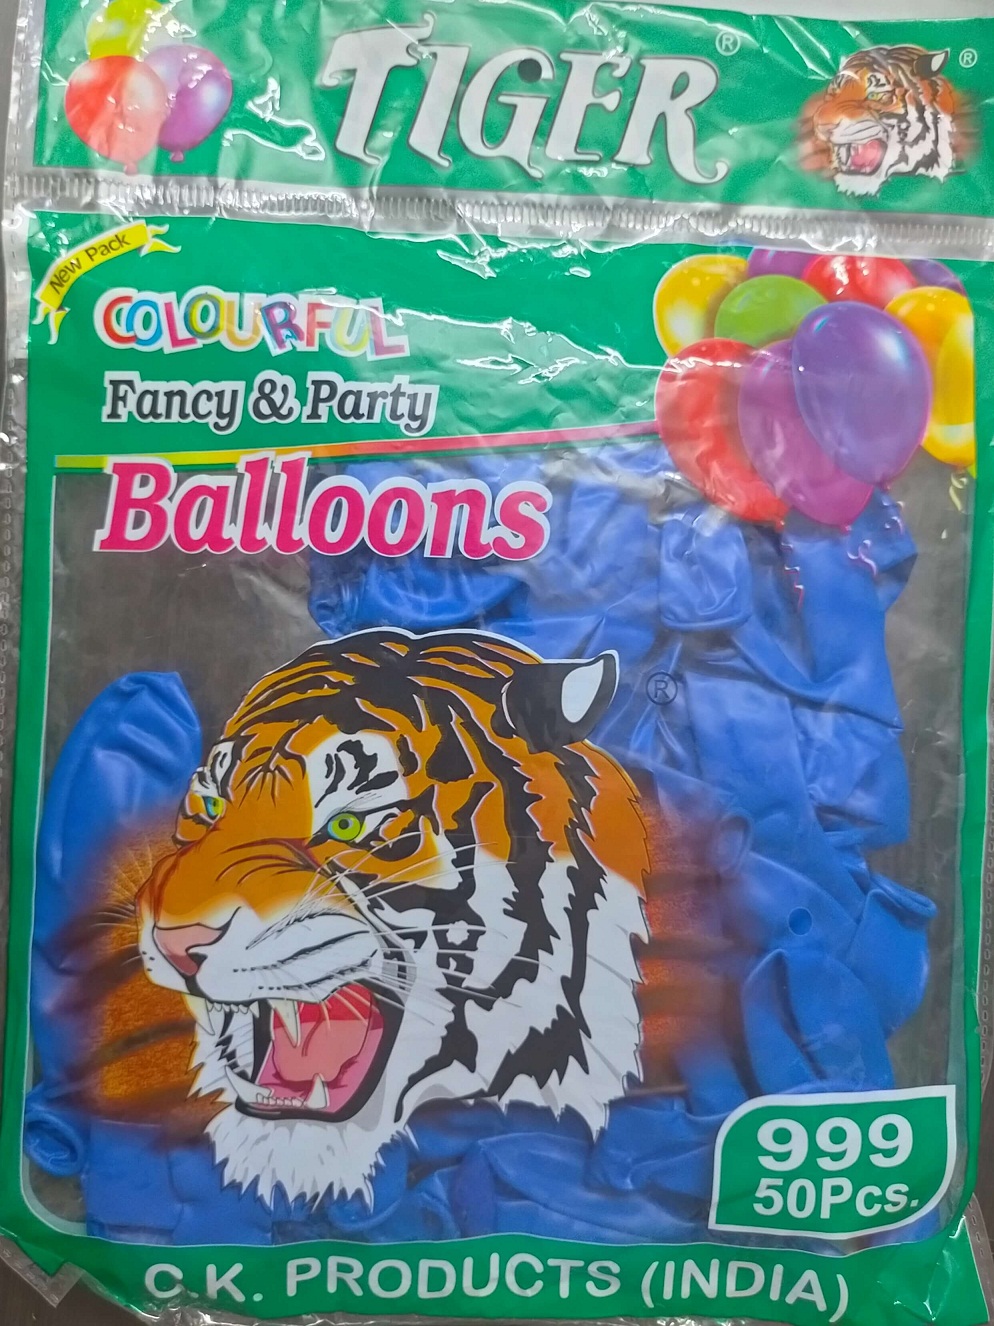 Tiger Balloons for Party (Blue)